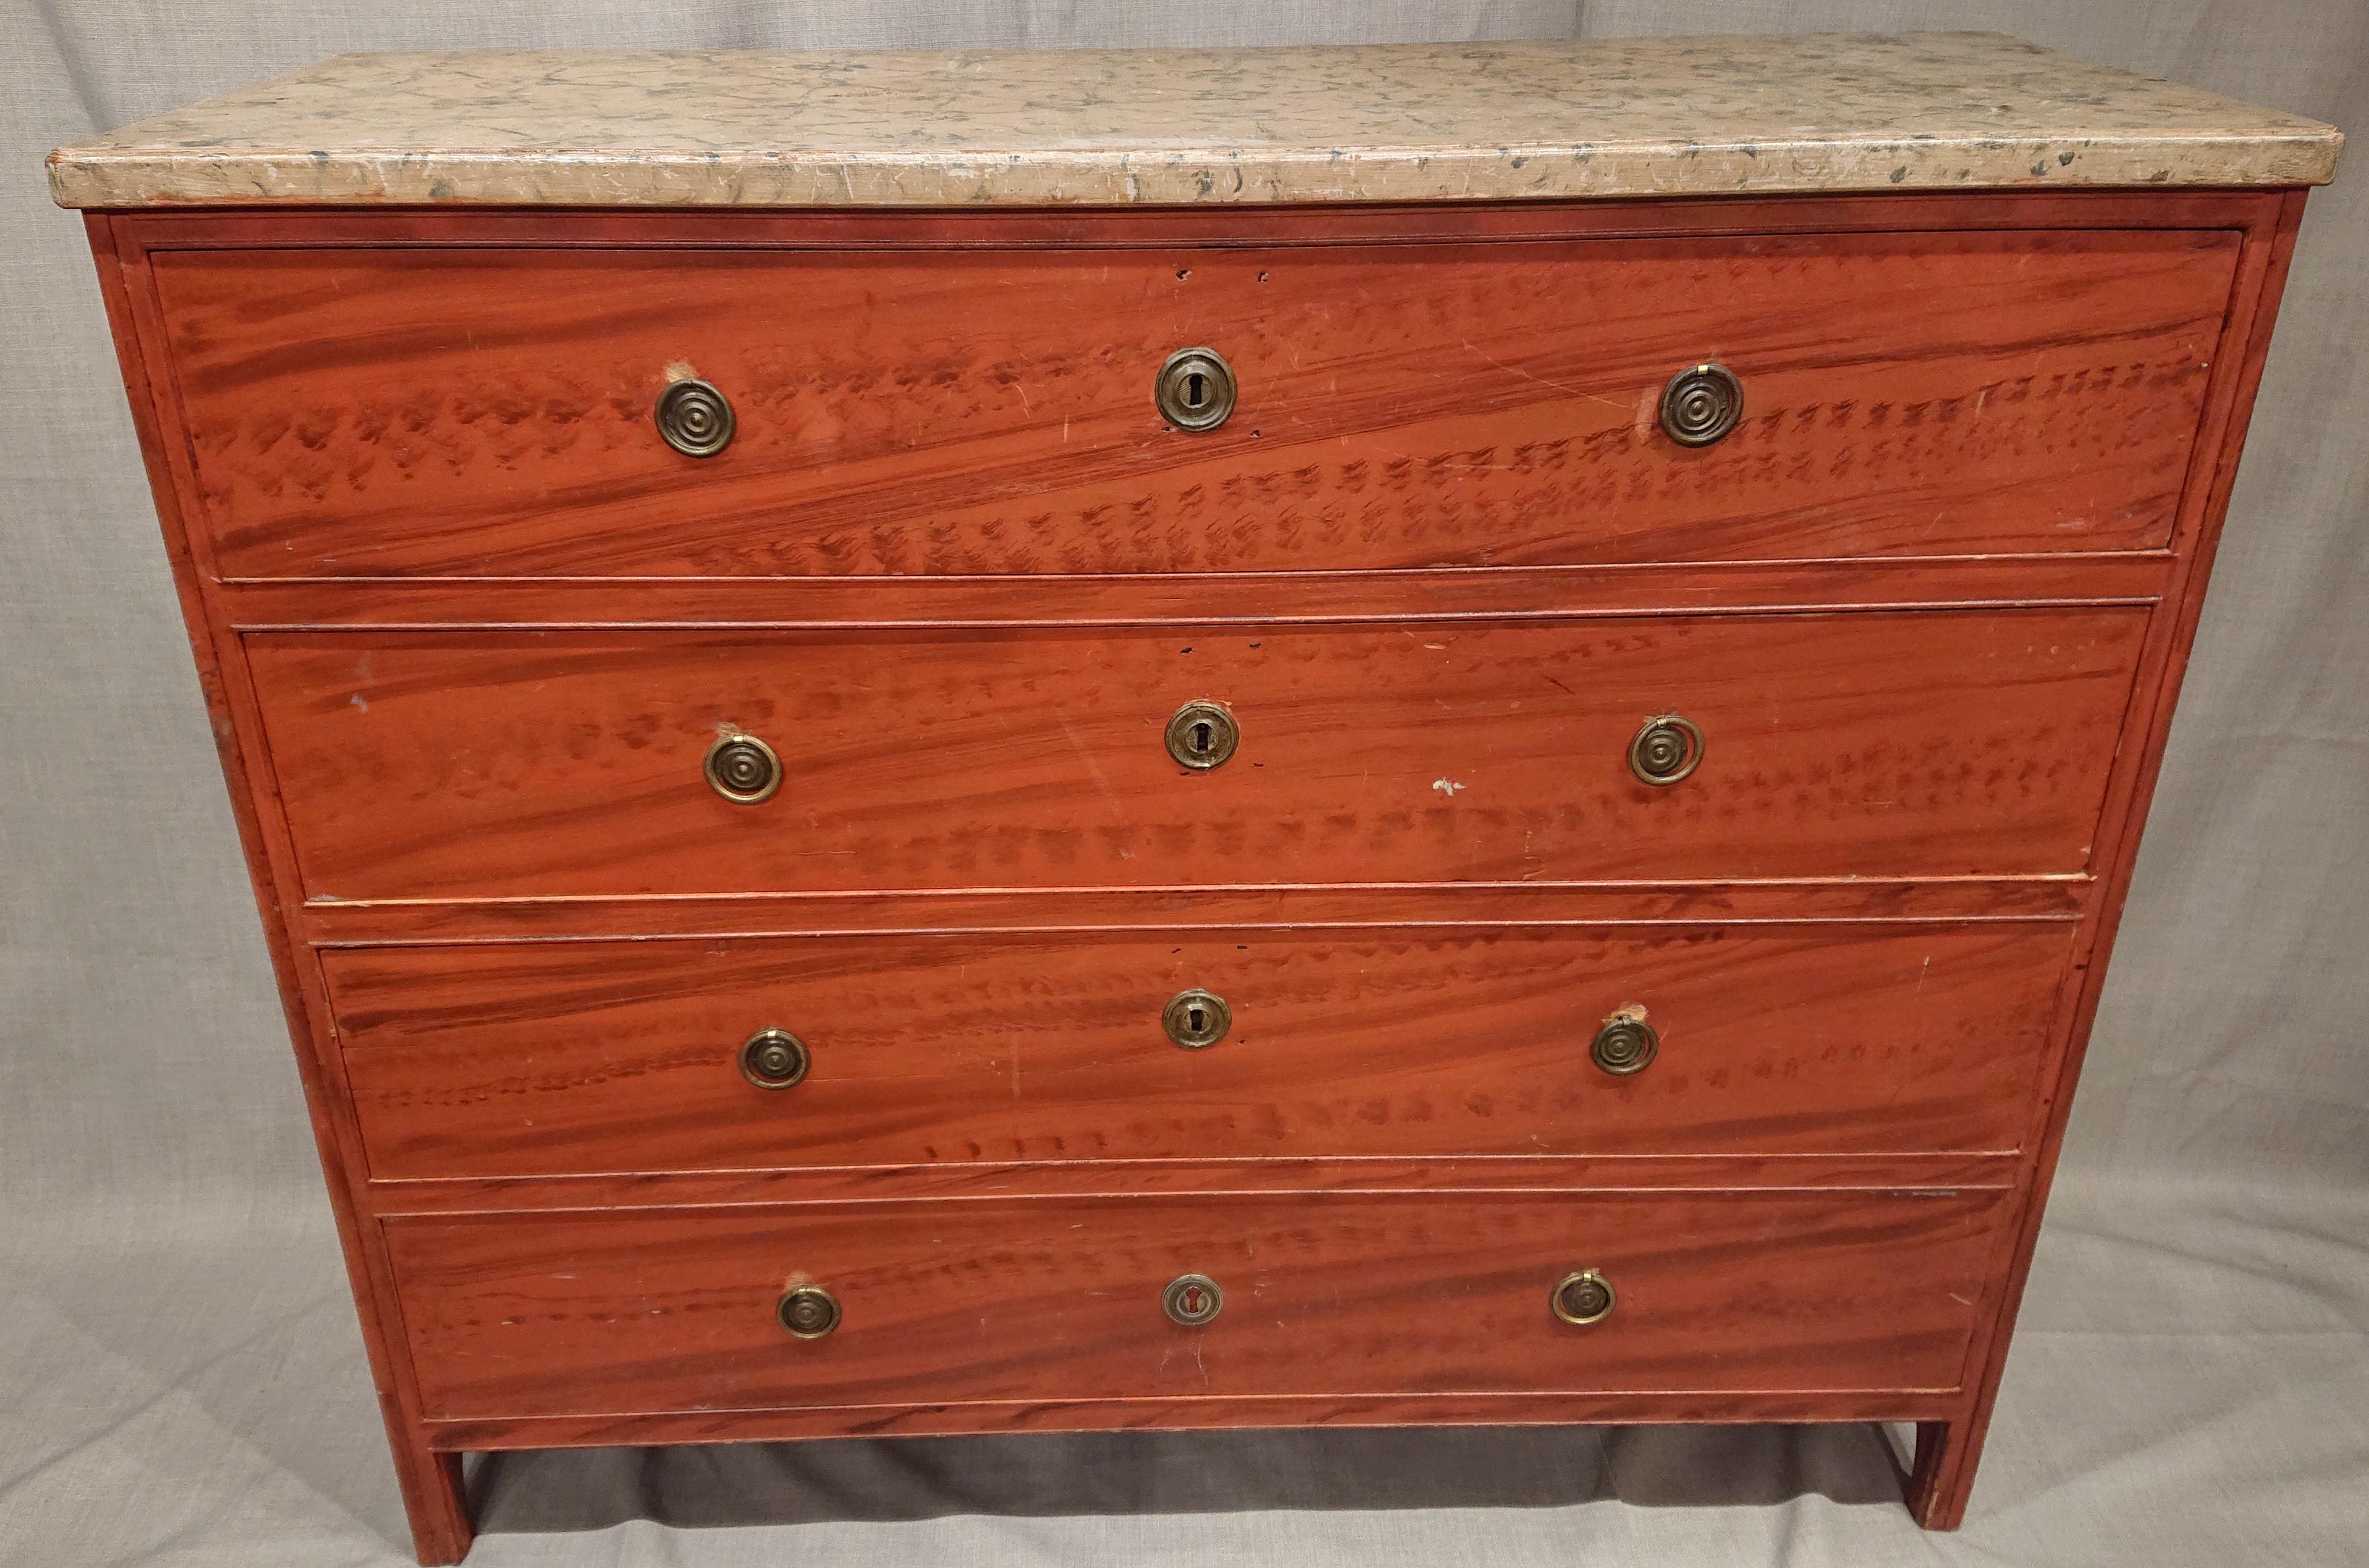 19th Century Swedish Gustavian Chest of drawers with untouched Original paint from Skelleftea Vasterbotten, Northern Sweden.
Made between 1800-1820
The Chest of Drawer has a beautiful exquisite painting in its original condition.
The top is